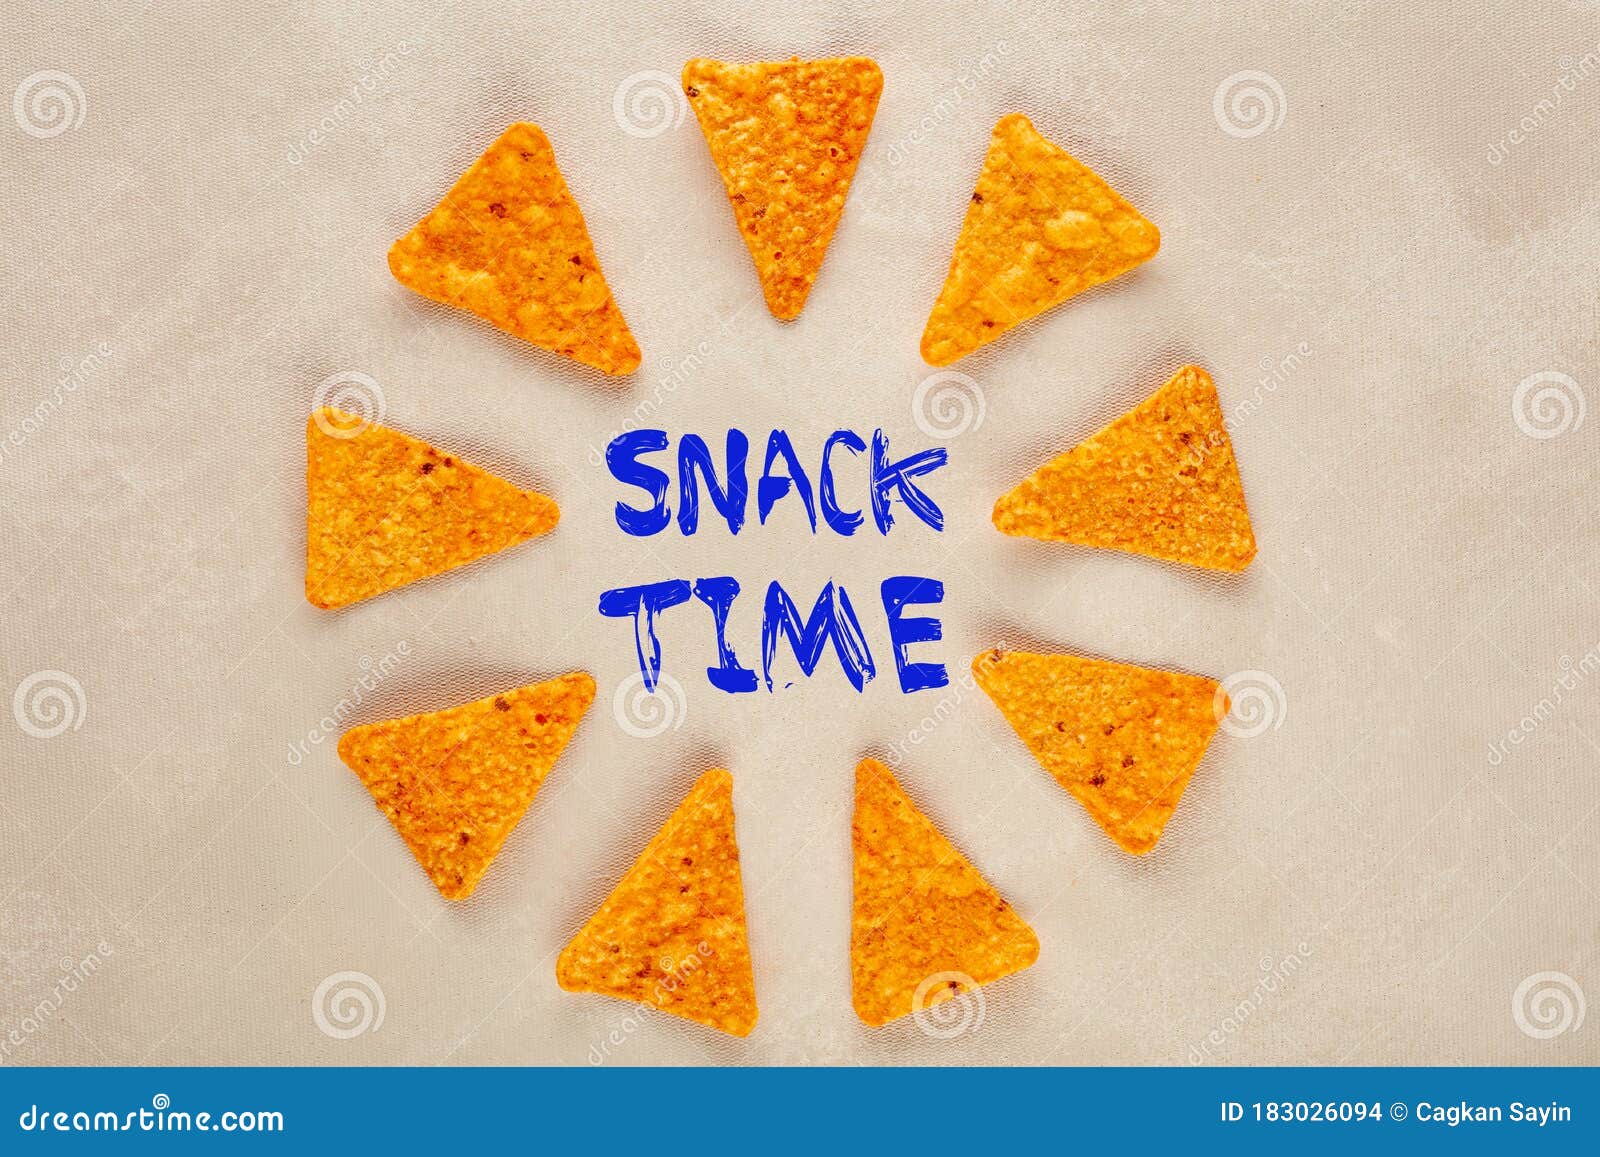 Time picture snack 